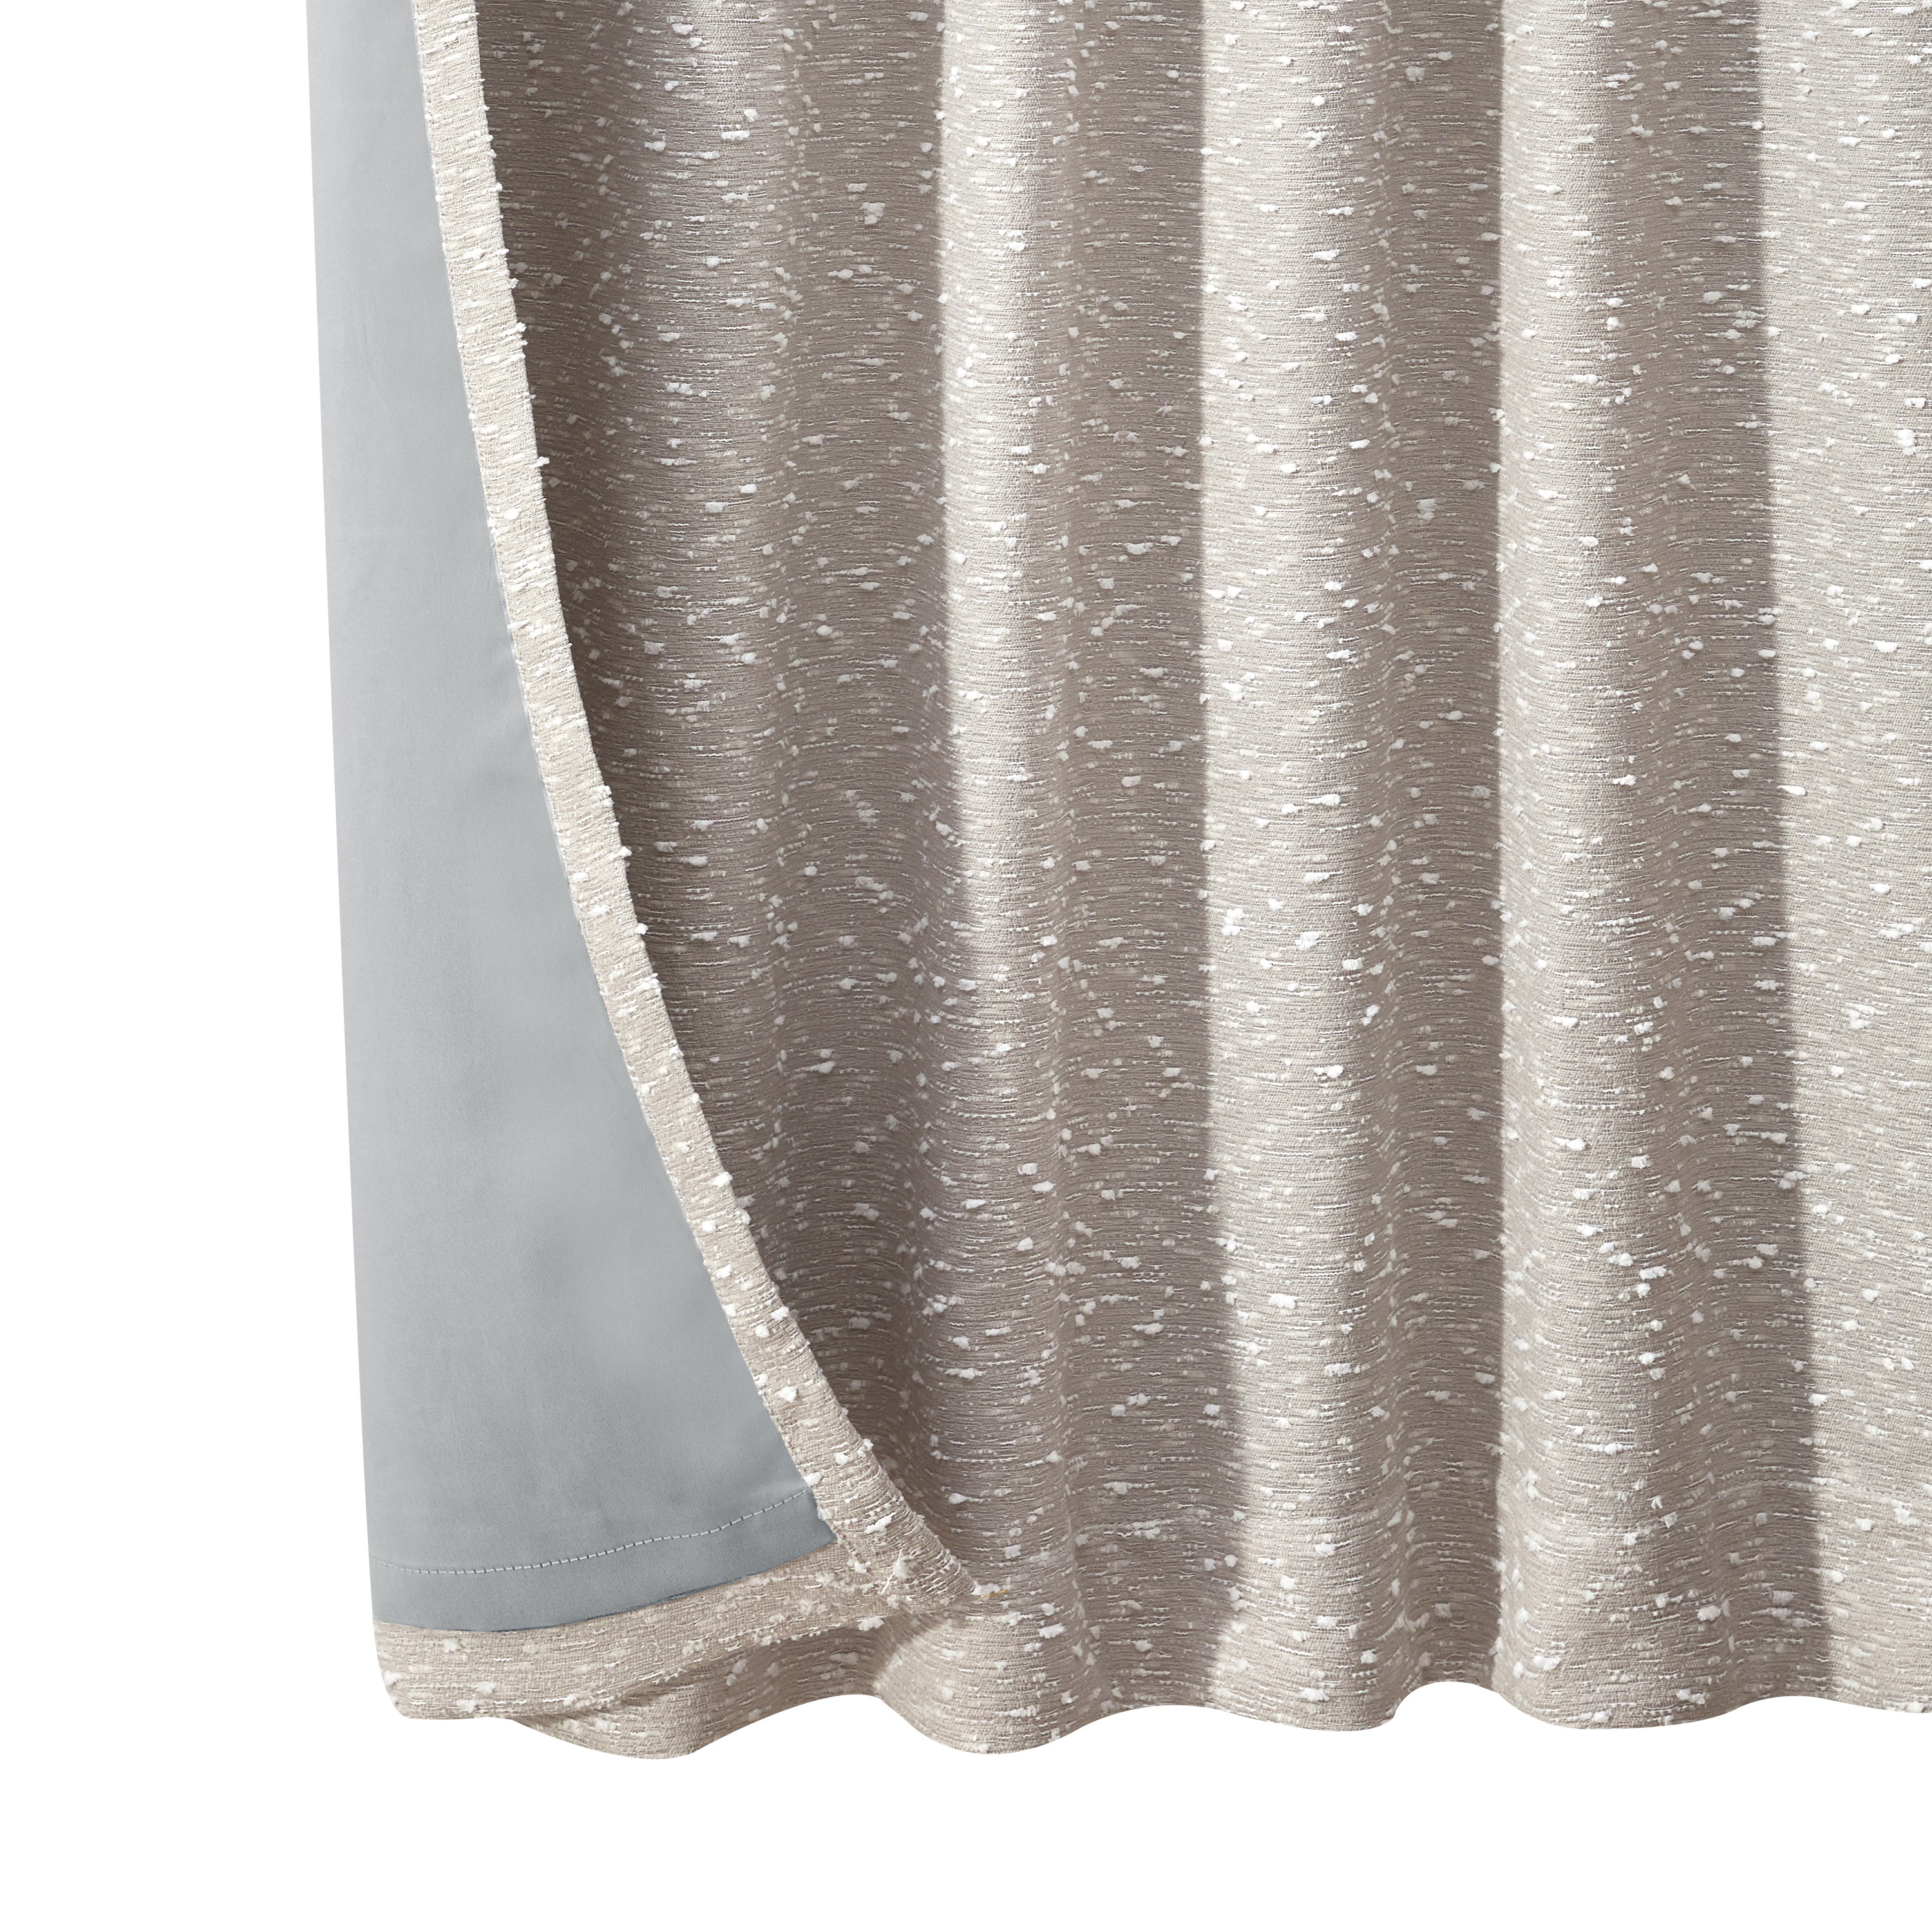 Better Homes & Gardens Boucle Blackout Curtain Panel, 50" x 95", Beige Polyester - image 2 of 7